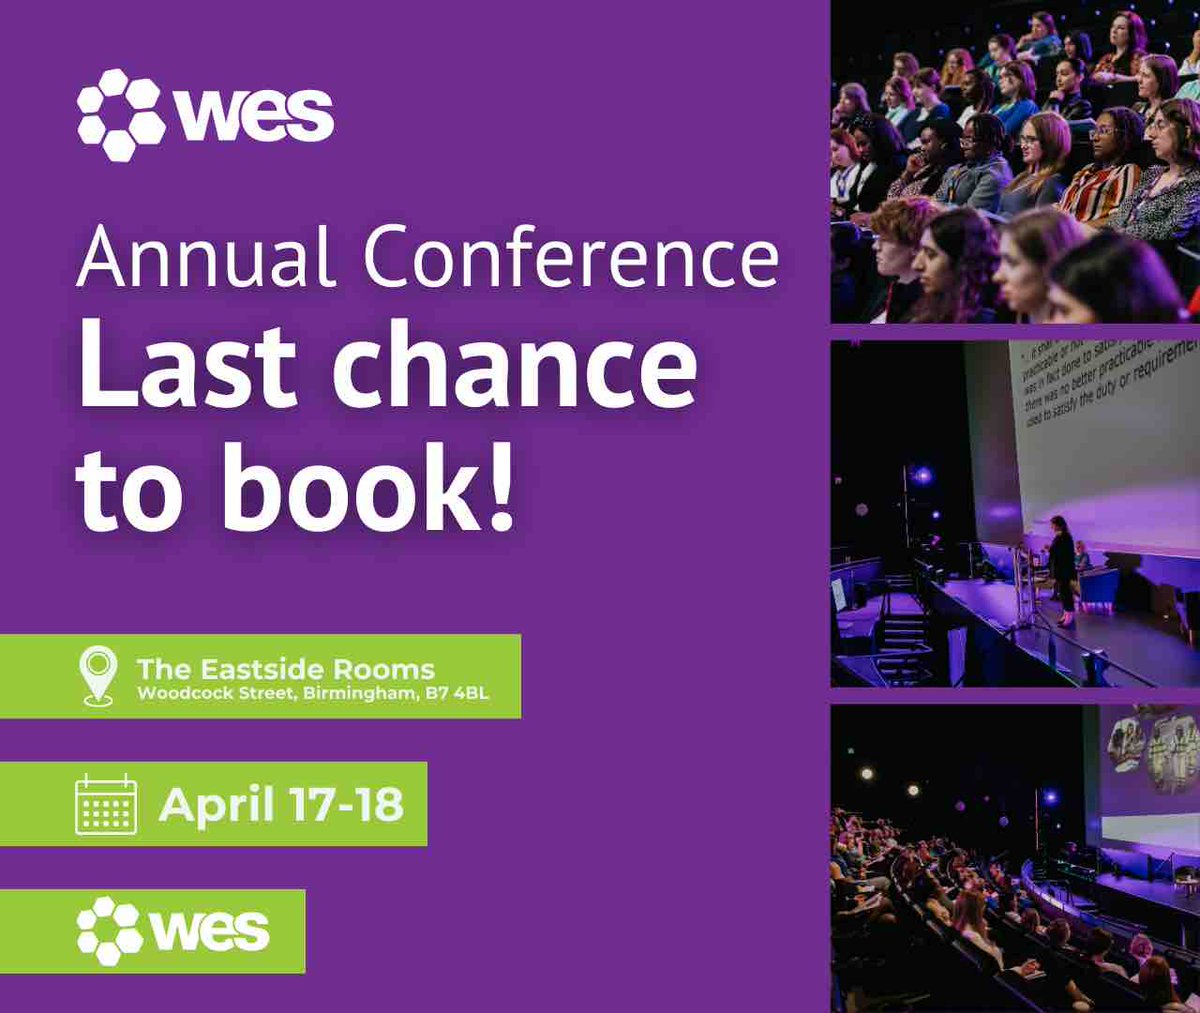 Last Chance to Book! ⏳ Bookings for our #WESAnnualConference close tomorrow at midnight! Don’t let the clock run out on the opportunity to attend the engineering event of the year! Book now: ow.ly/nSre50R4sbn #WES #AnnualConference #engineering #WomanEngineer